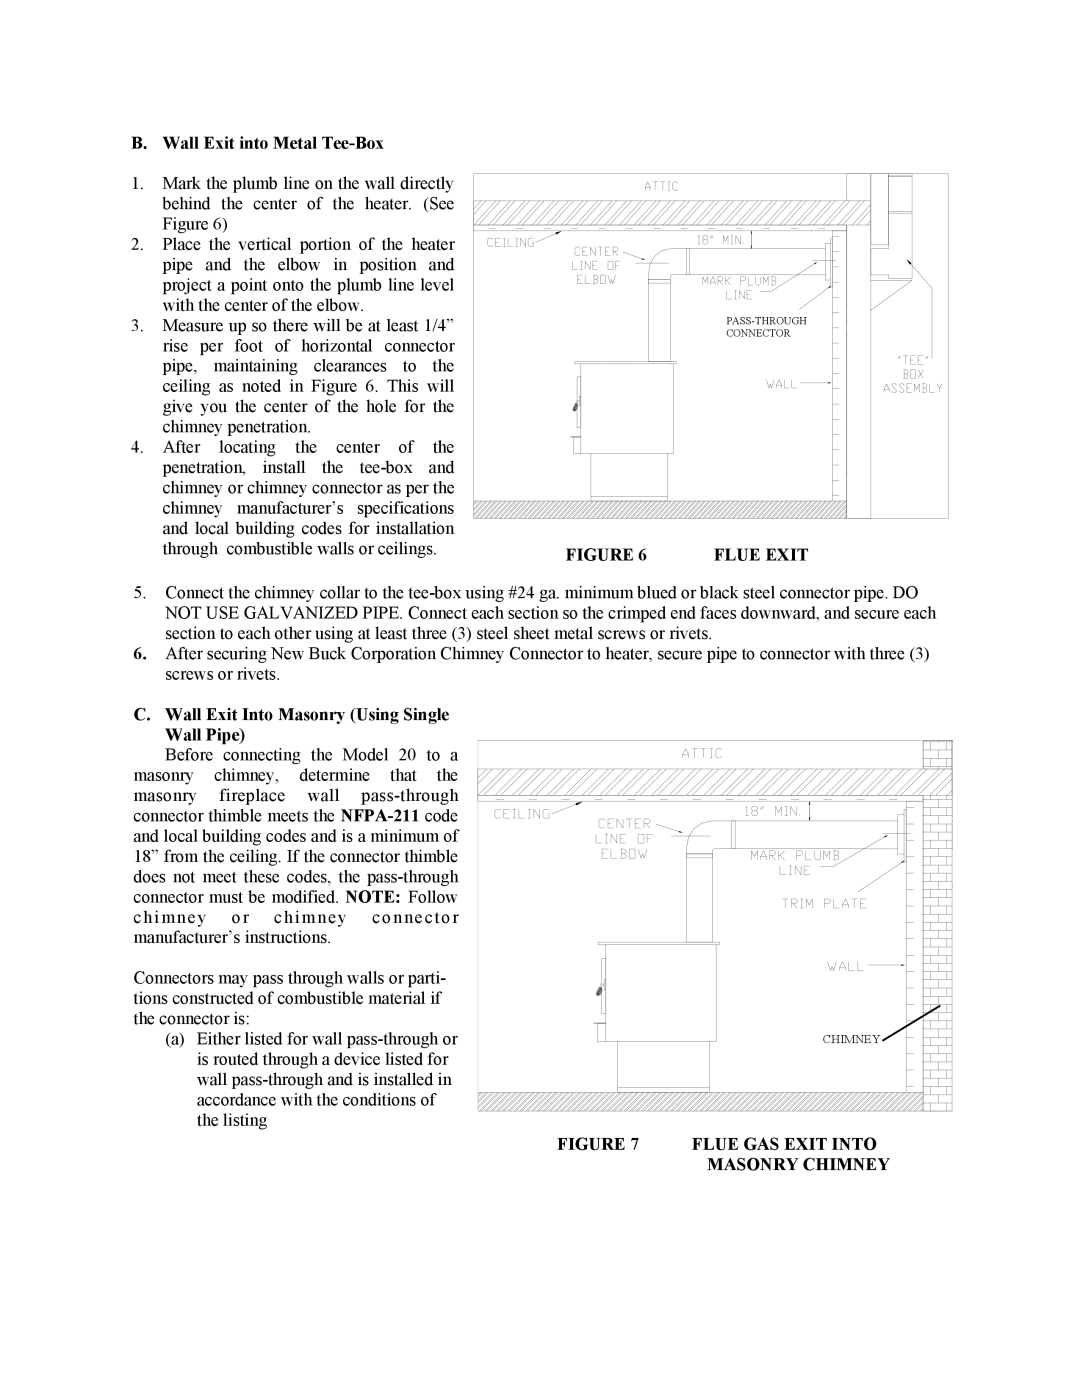 New Buck Corporation 20 Room Heater manual B. Wall Exit into Metal Tee-Box, Flue Exit, Flue Gas Exit Into Masonry Chimney 